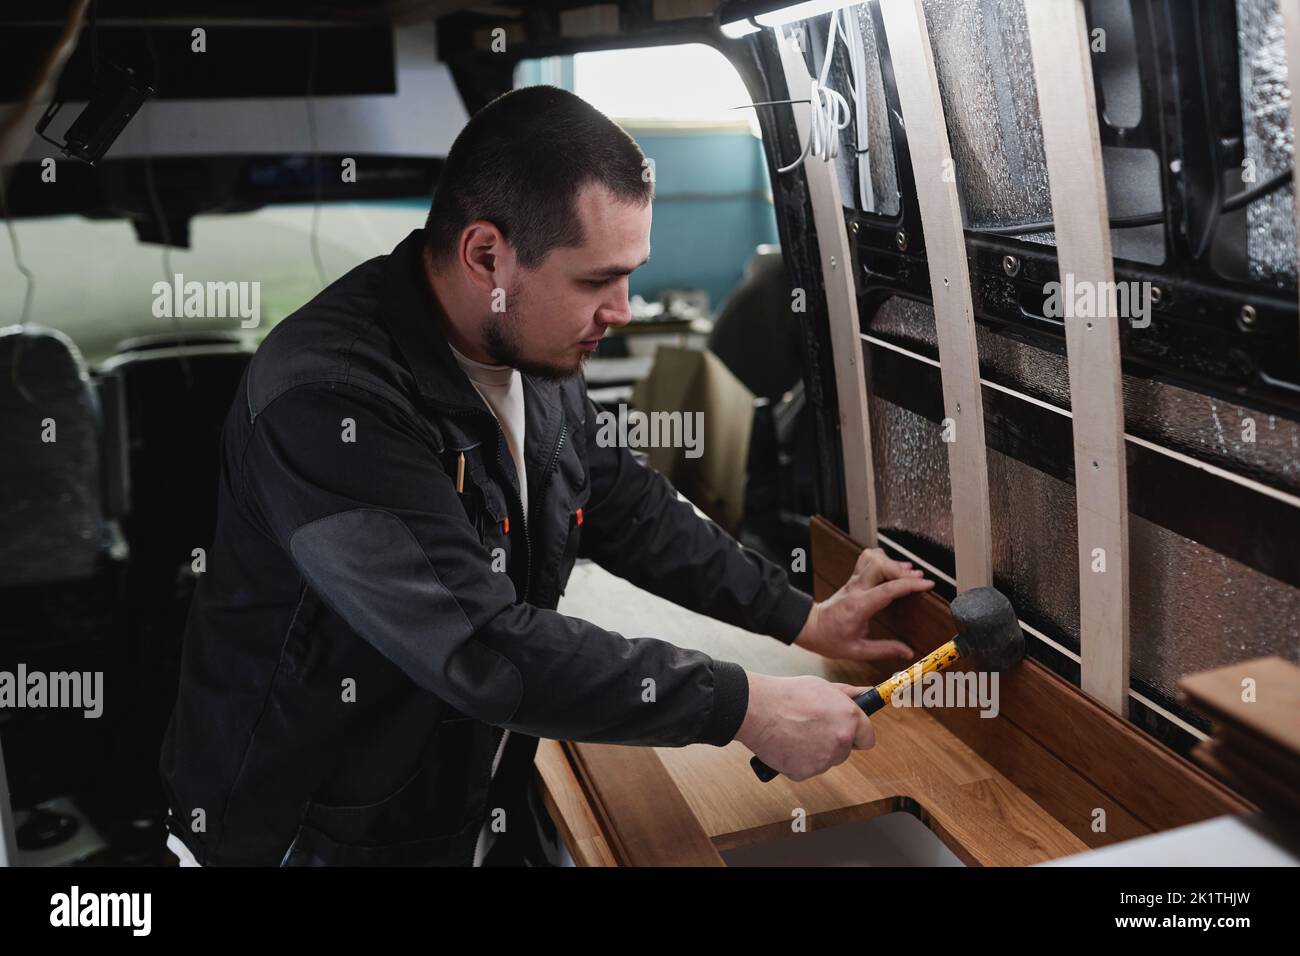 Side view portrait of young man building camper van and installing furniture in kitchen area Stock Photo